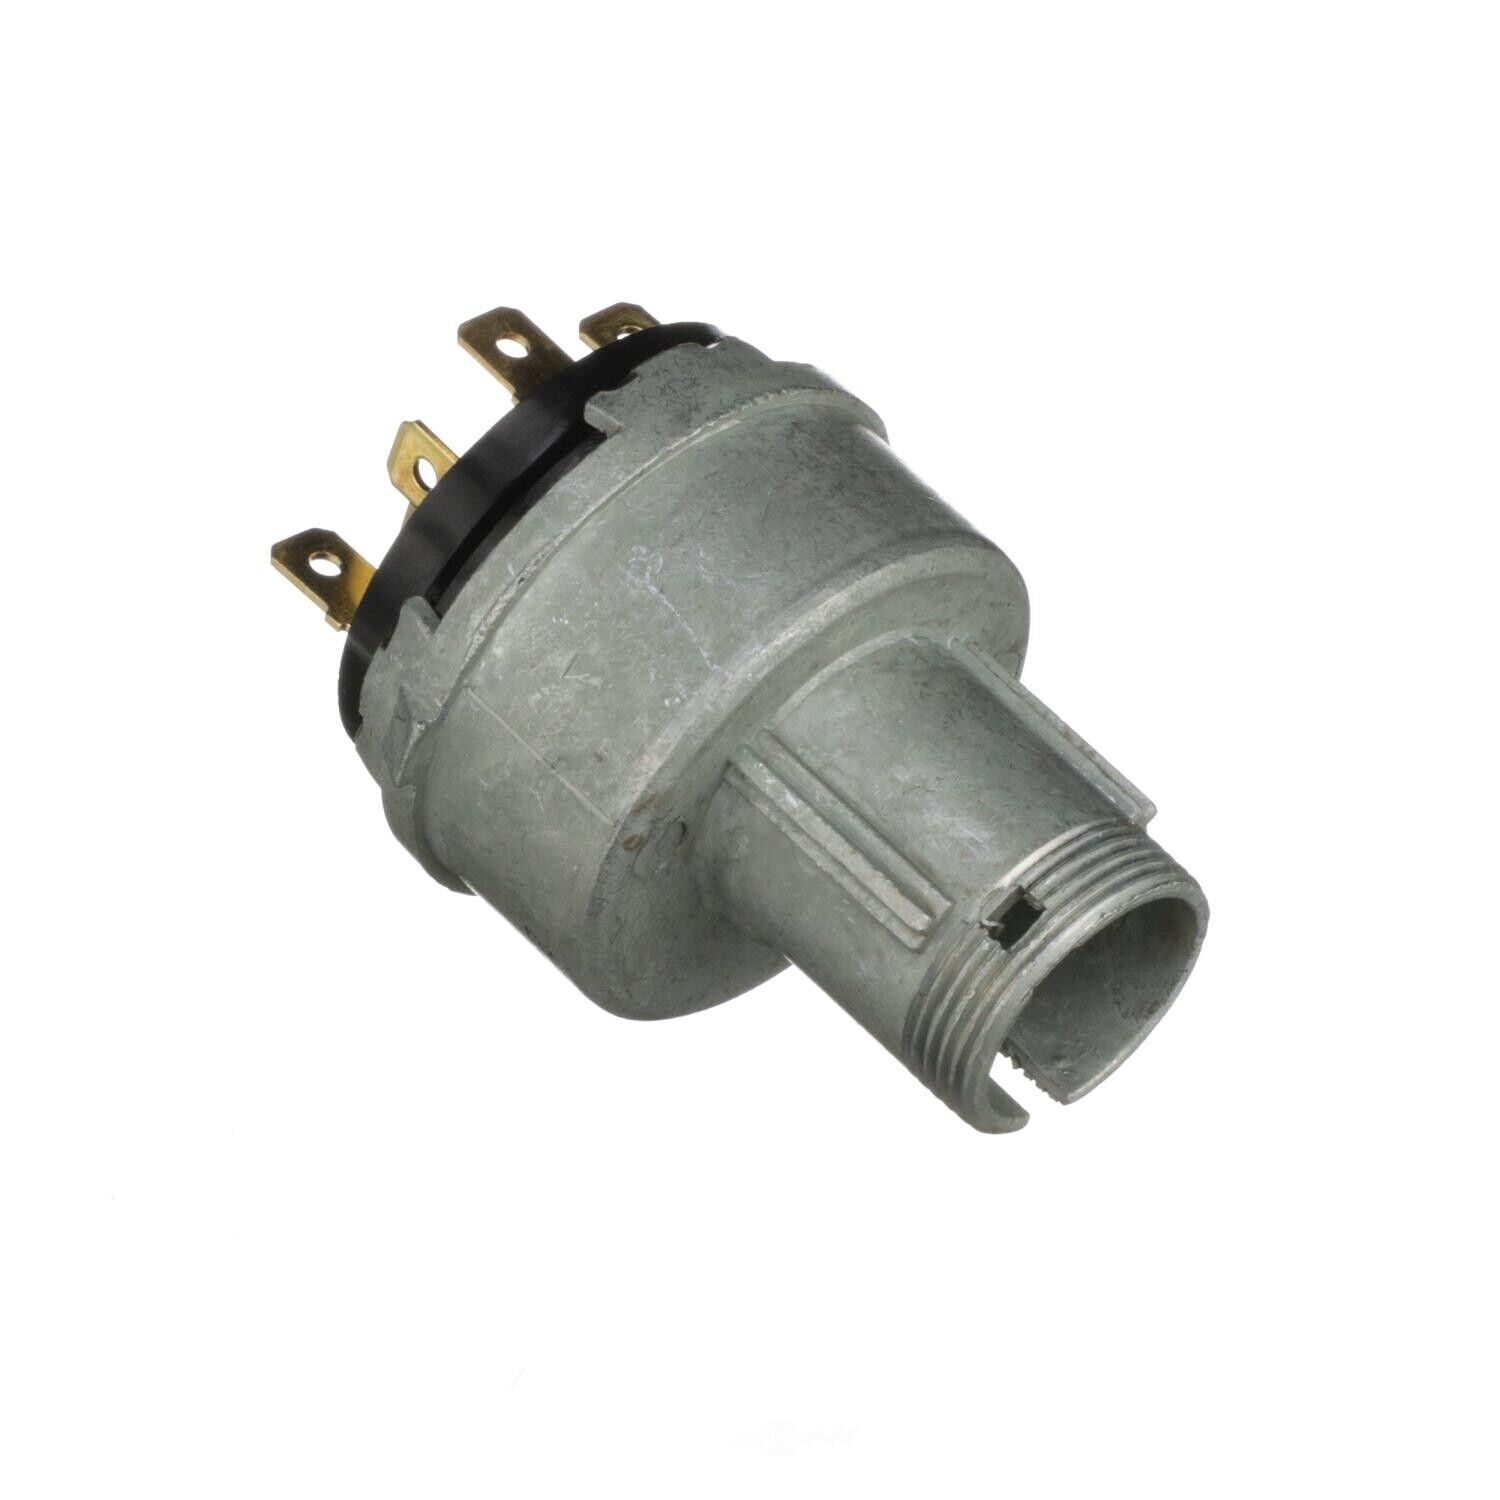 Standard US50 Ignition Switch